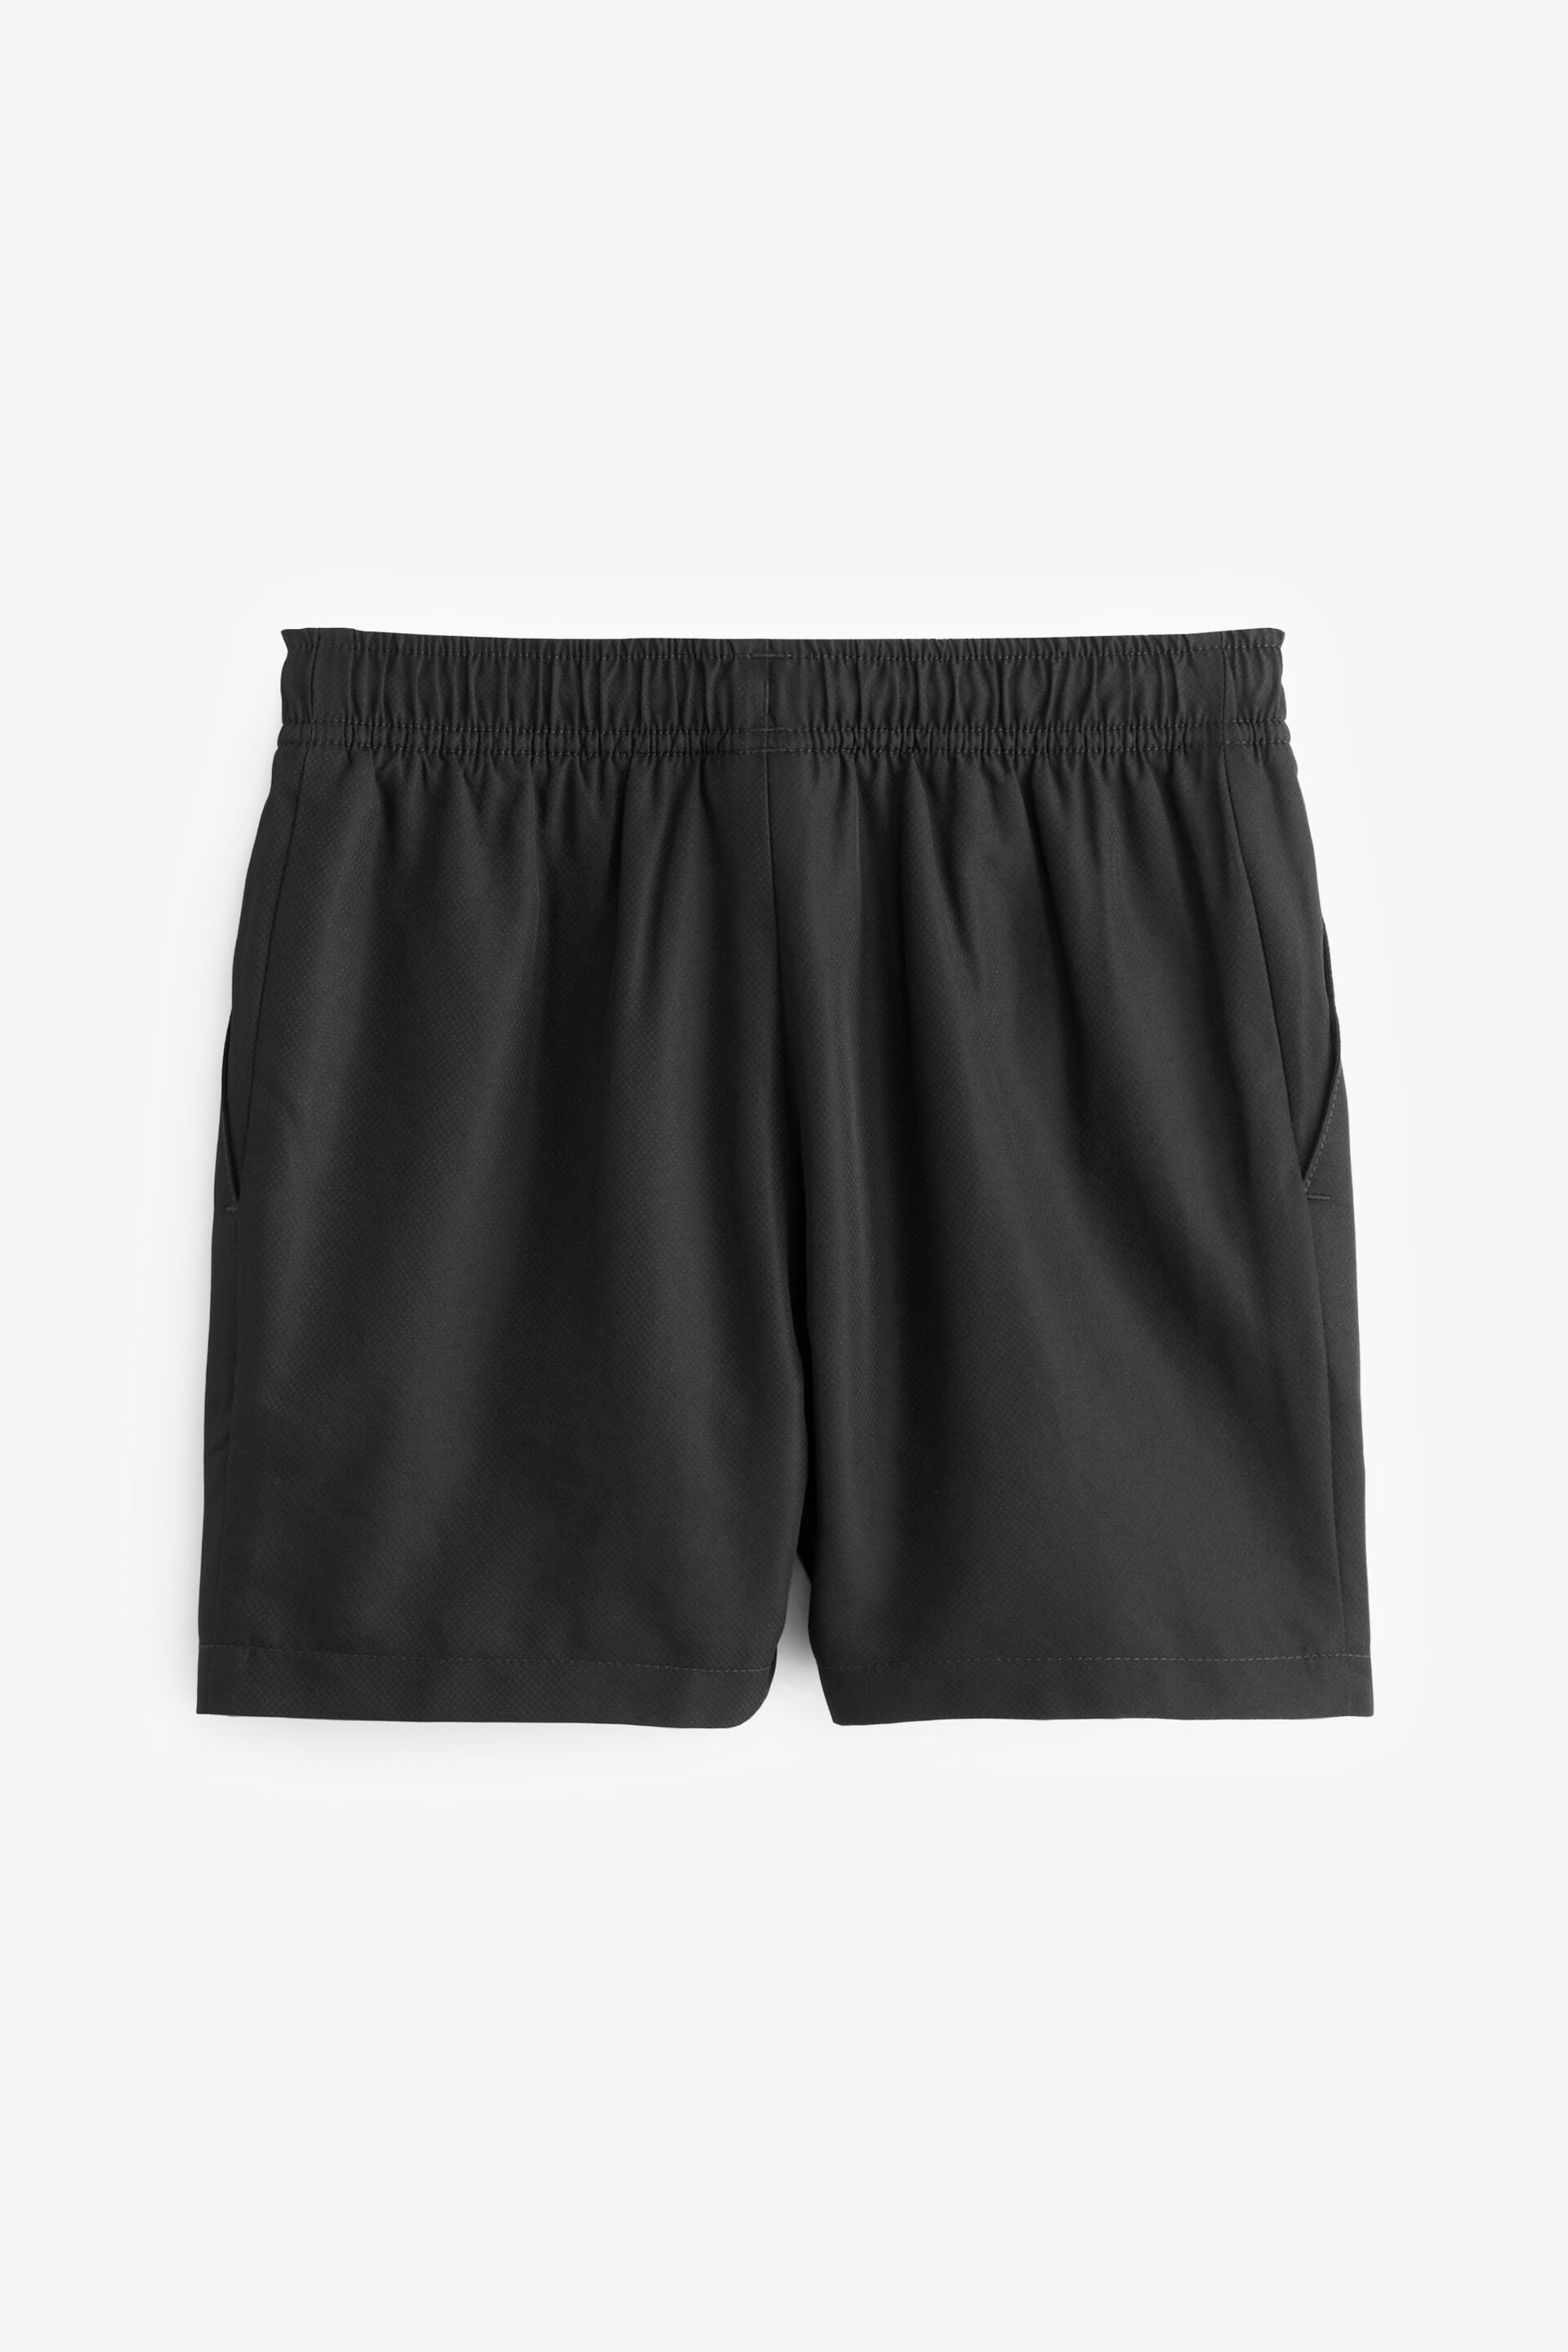 Lacoste Childrens Lightweight Performance Shorts - Image 4 of 5